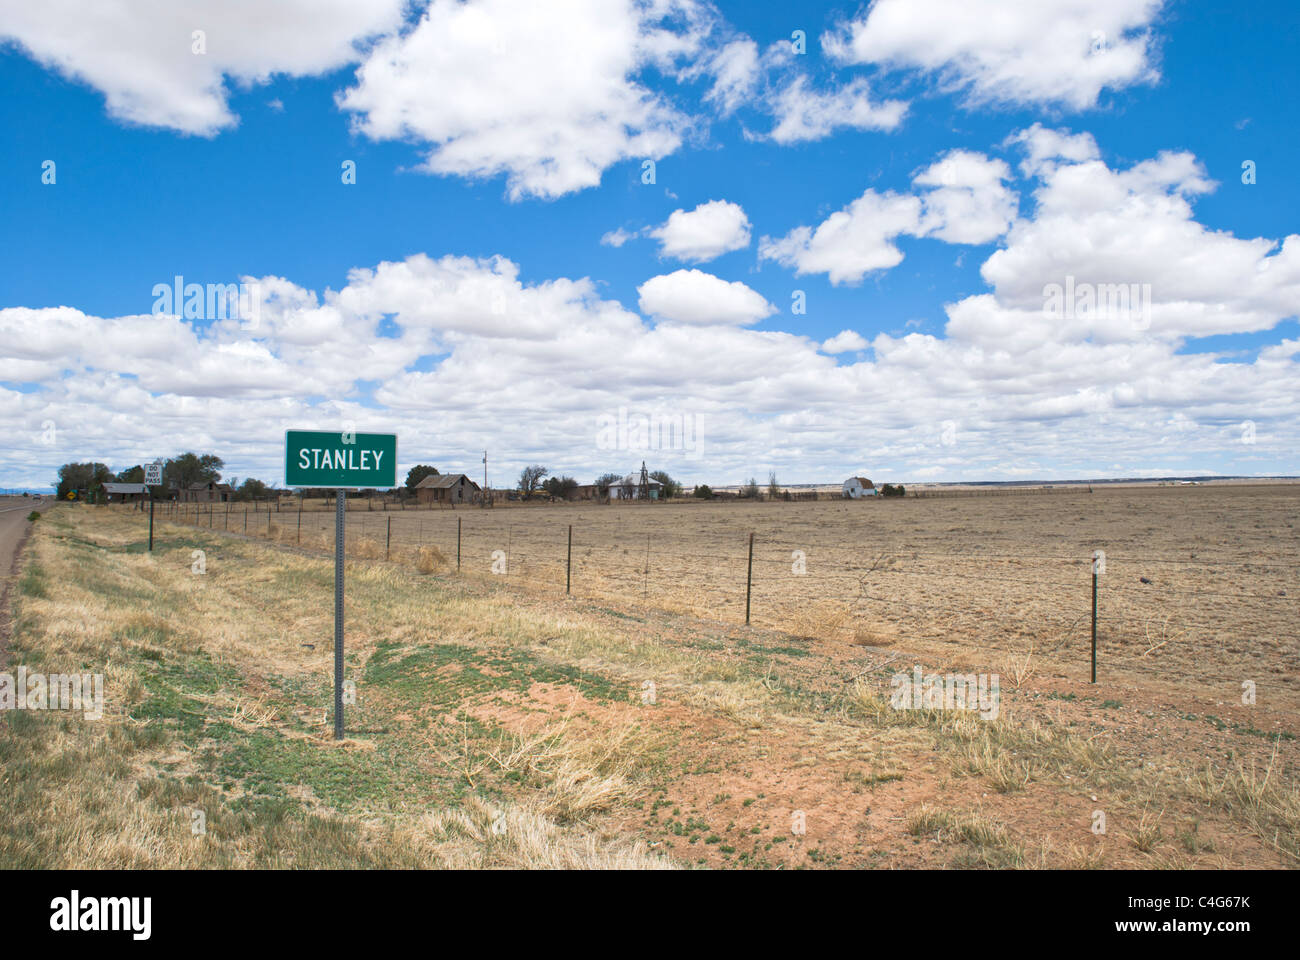 A sign along the roadside is the only indication that one is passing through the remote town of Stanley, New Mexico. Stock Photo